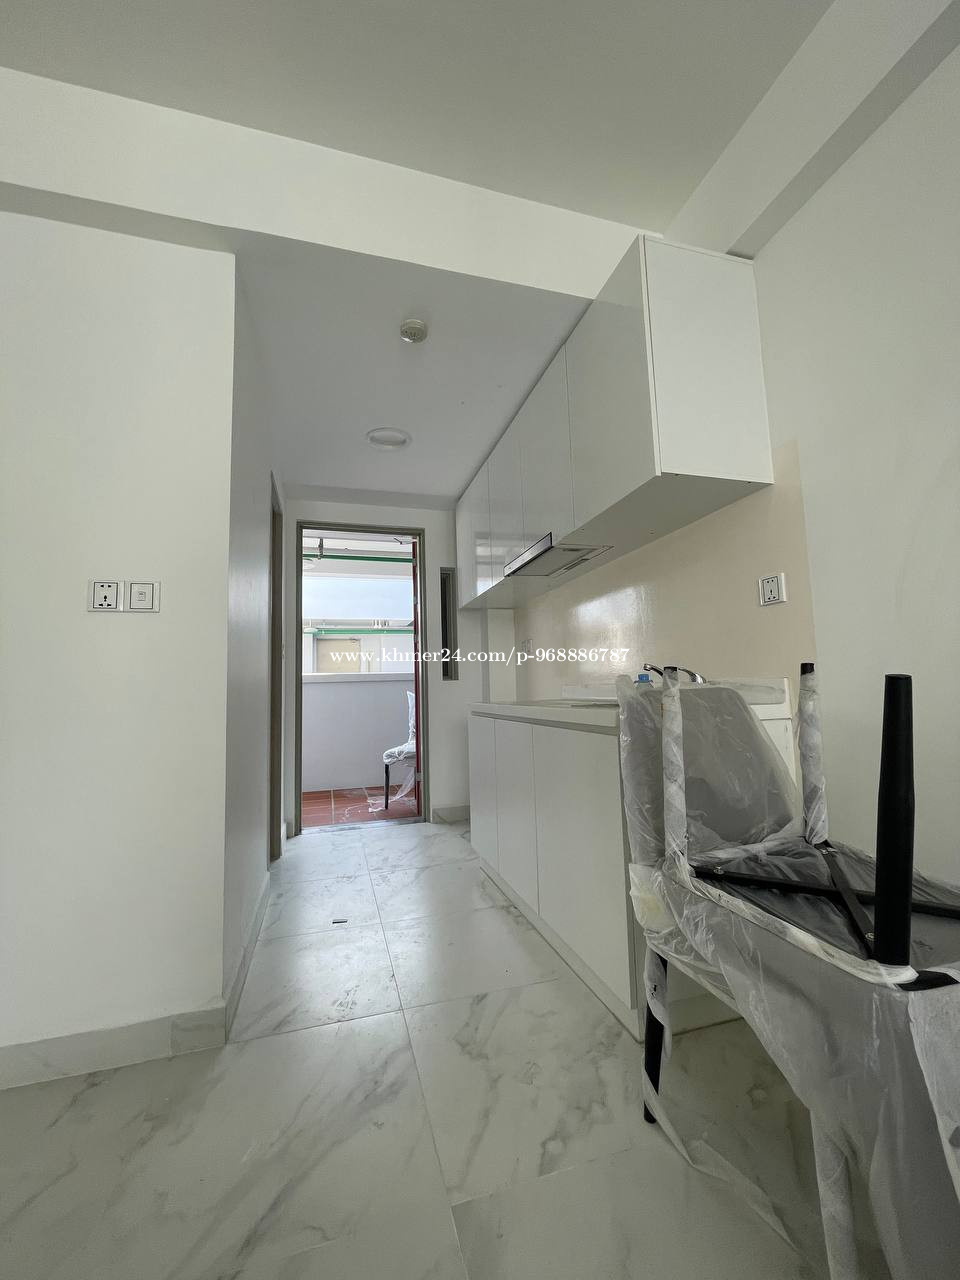 Condo 2 bed rooms: sale 76,000$ or rent 600$/month, highest Floor 21st